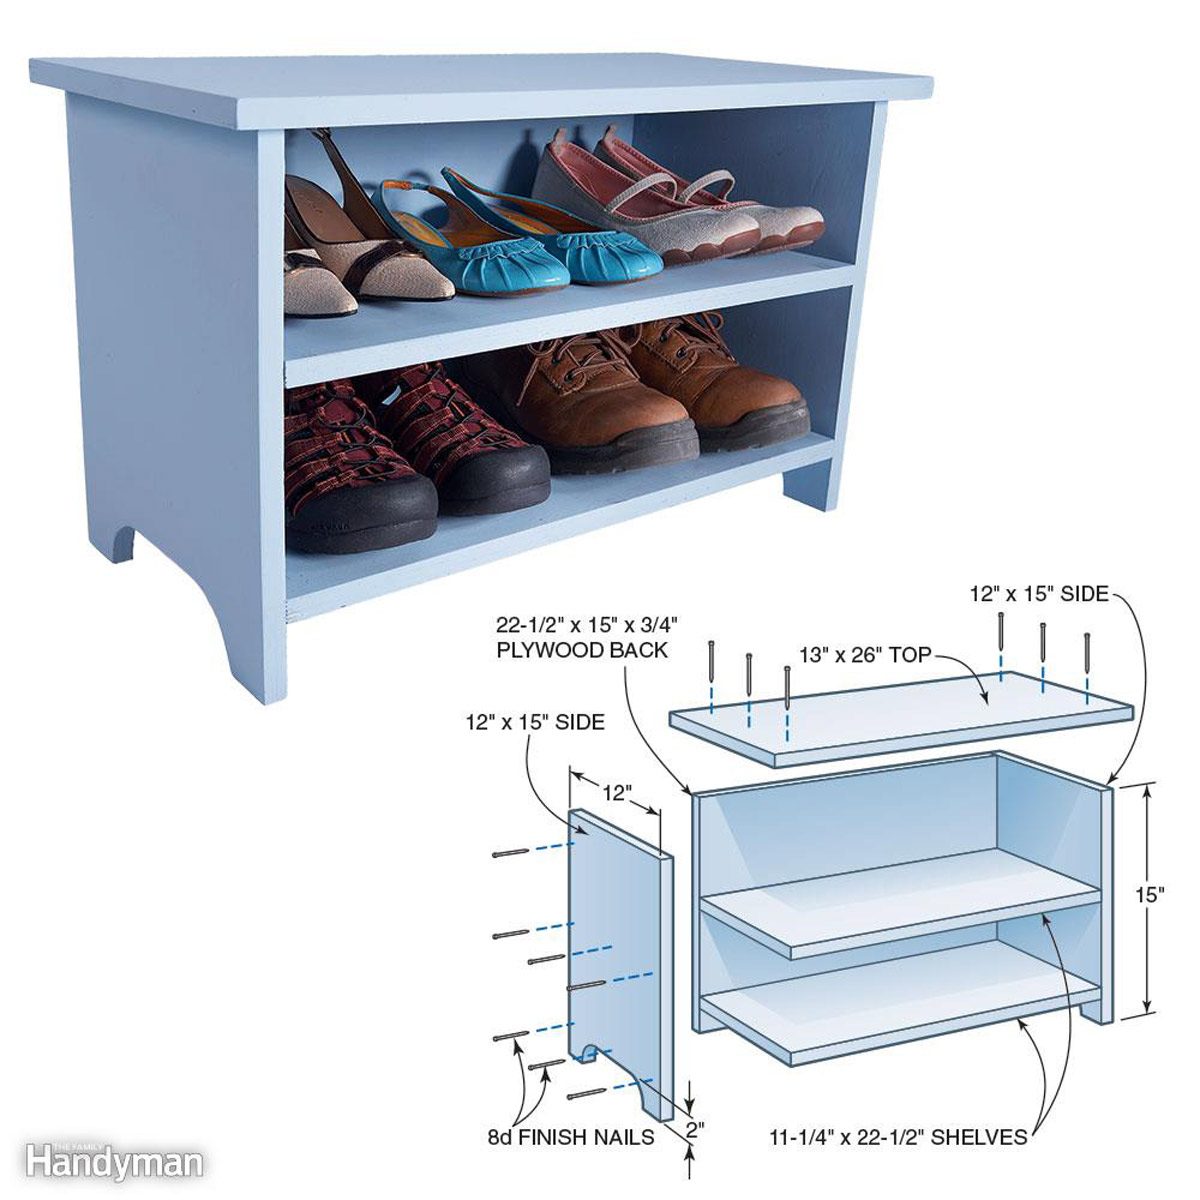 $4 DIY Electronic Parts Storage : 3 Steps (with Pictures